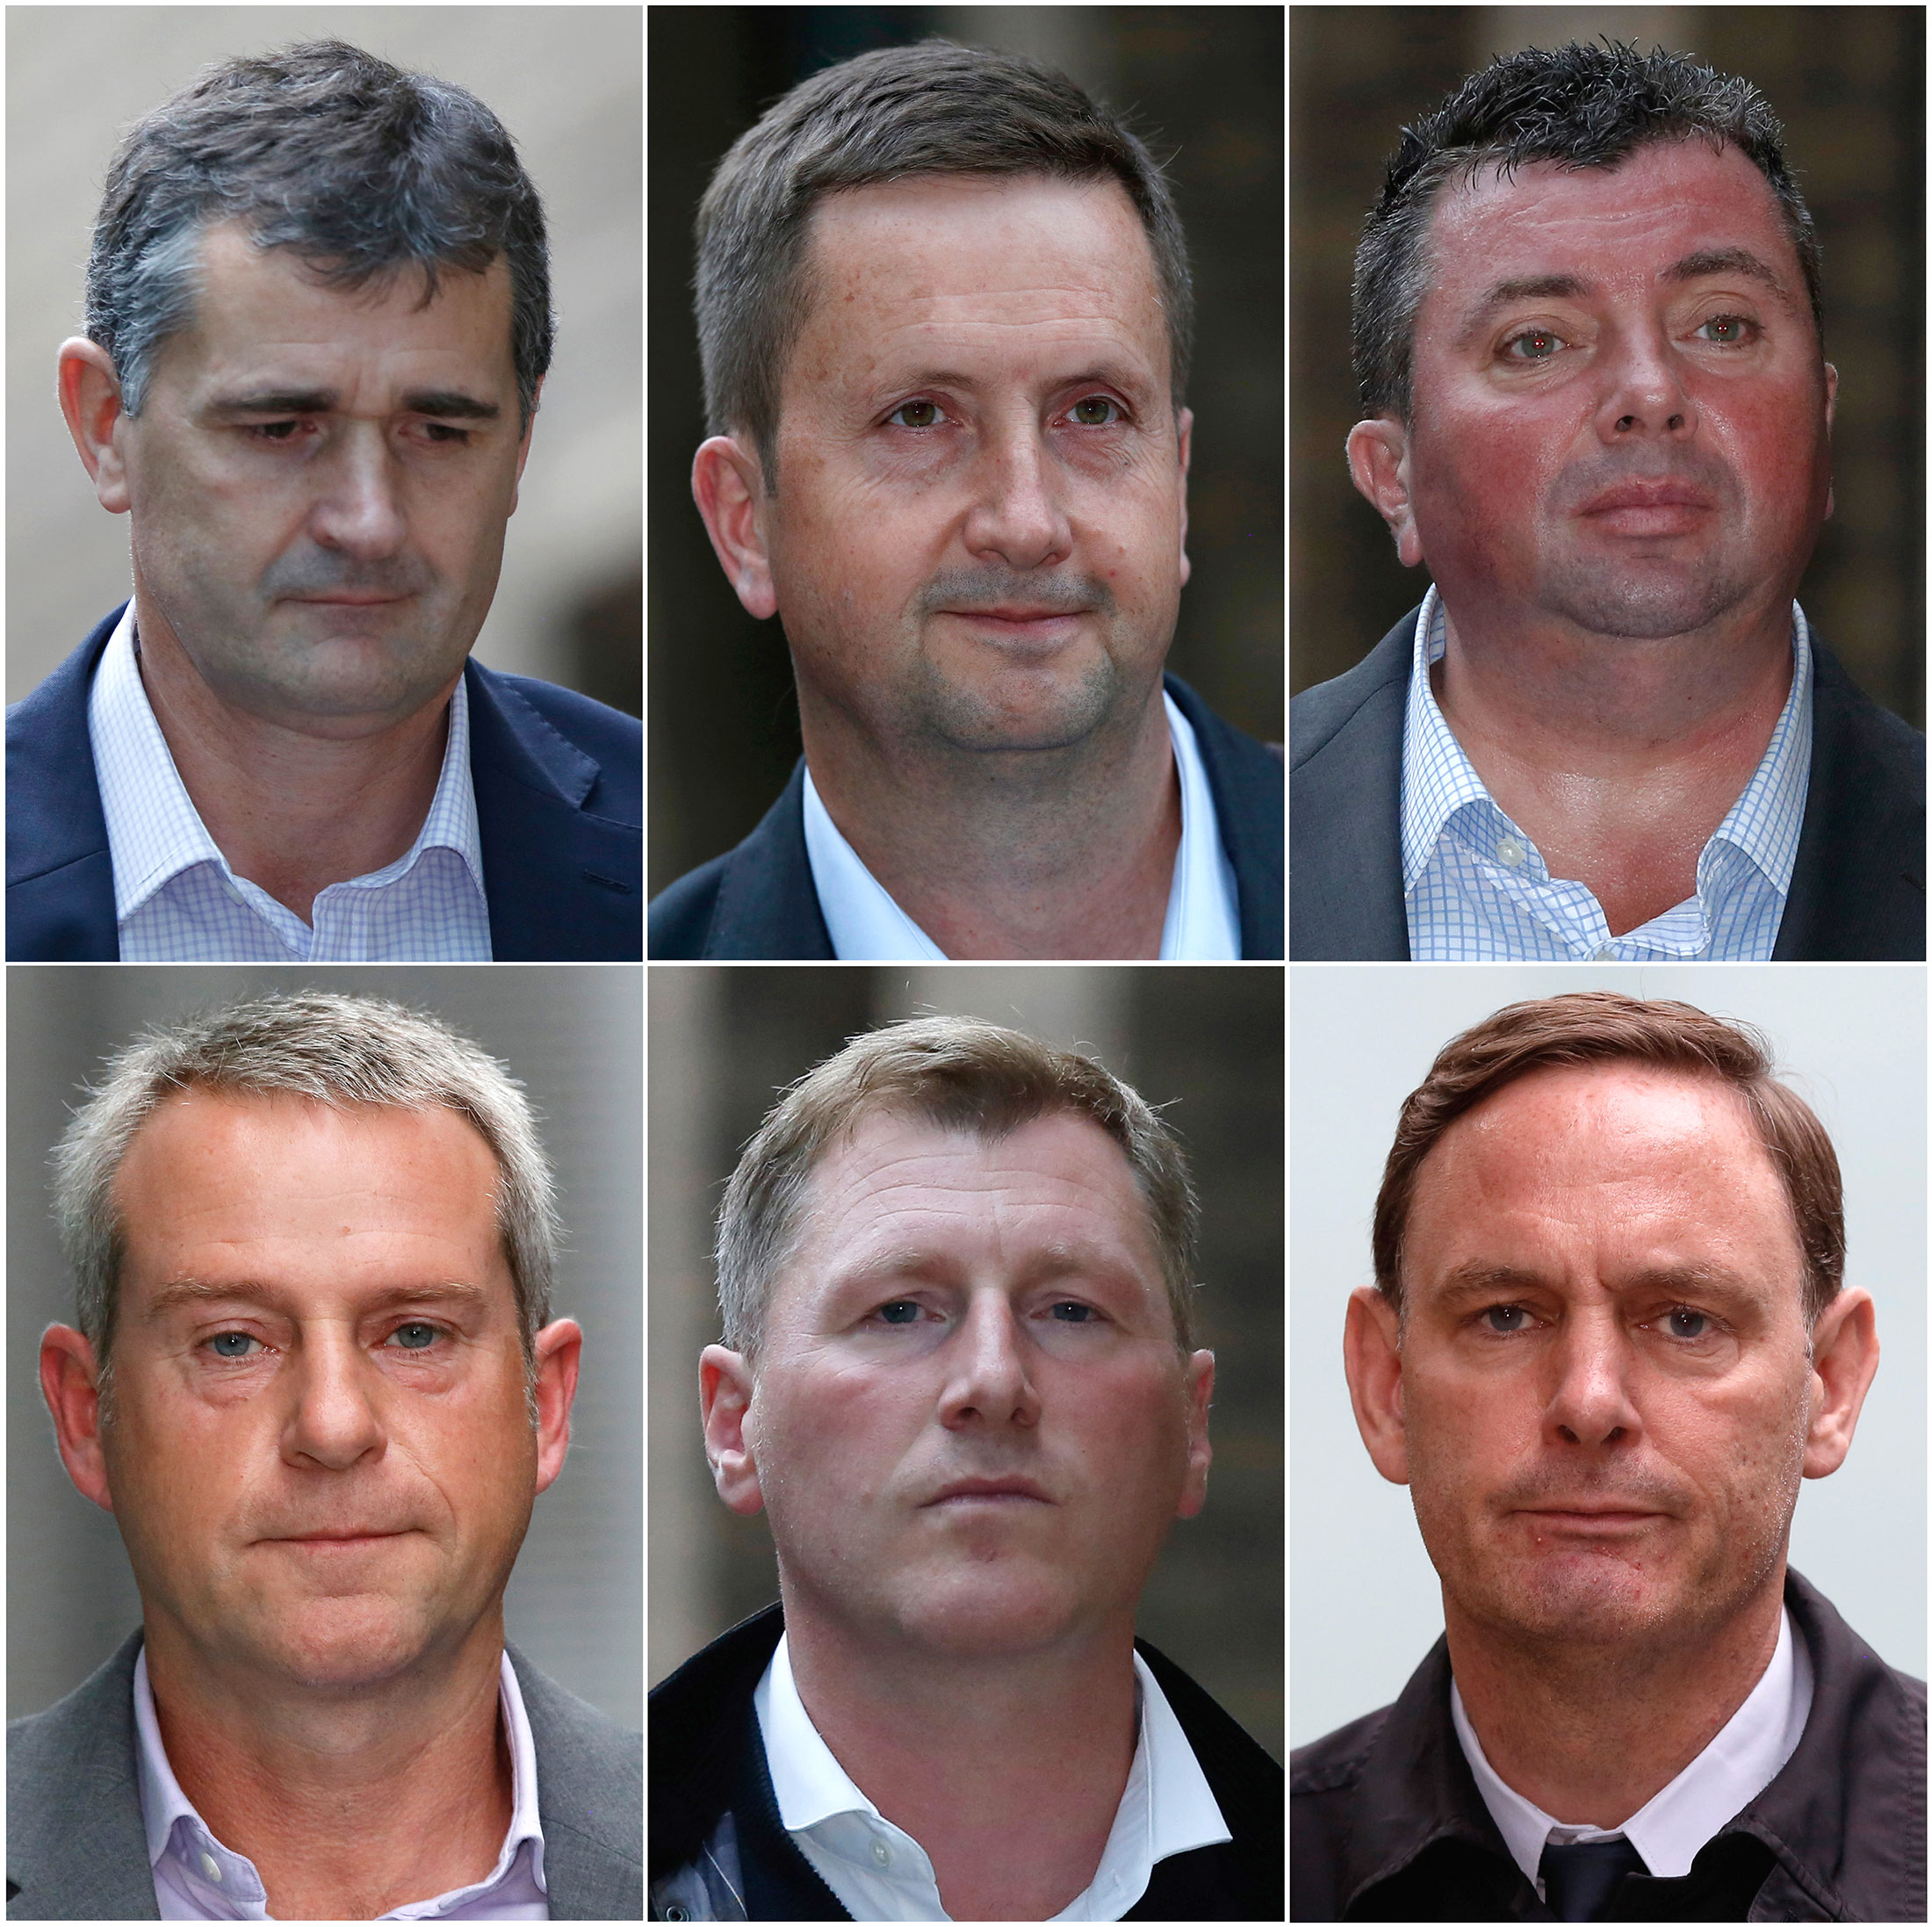 A combination photograph shows, top row from left to right, Darrell Read, Colin Goodman, Daniel Wilkinson, all former traders at ICAP Plc, bottom row from right to left Noel Cryan, a former broker at Tellett Prebon Plc, Terry Farr, a former broker at RP Martin Holdings Ltd., and James Gilmour, a former broker at RP Martin Holdings Ltd.
